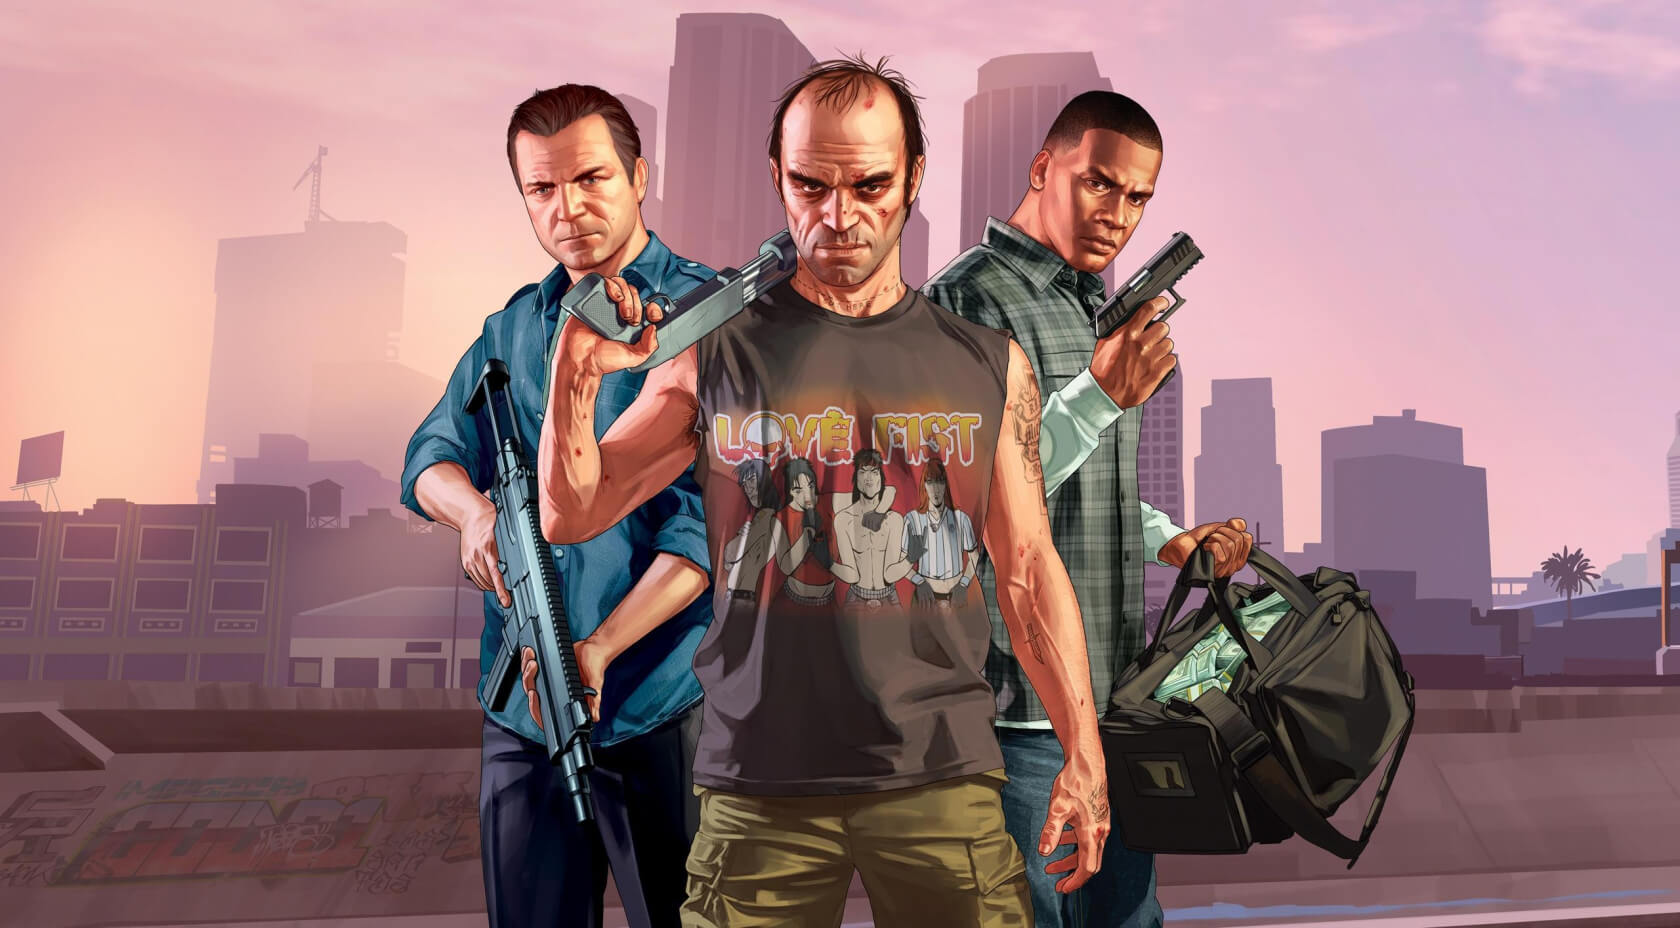 Ten Call of Duty games make decade's best-sellers list, but GTA V takes top spot